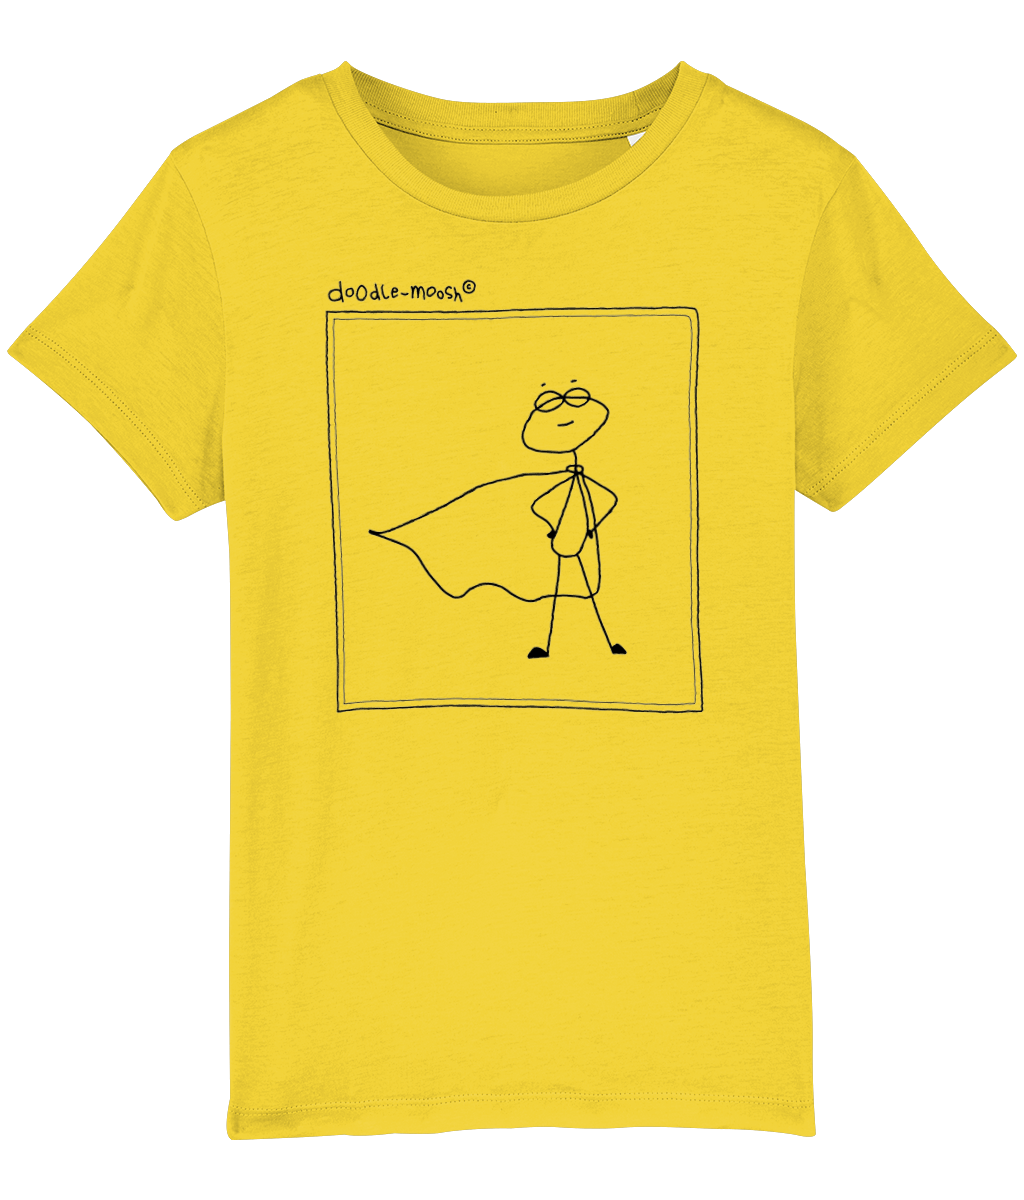 superpower t-shirt, yellow with black